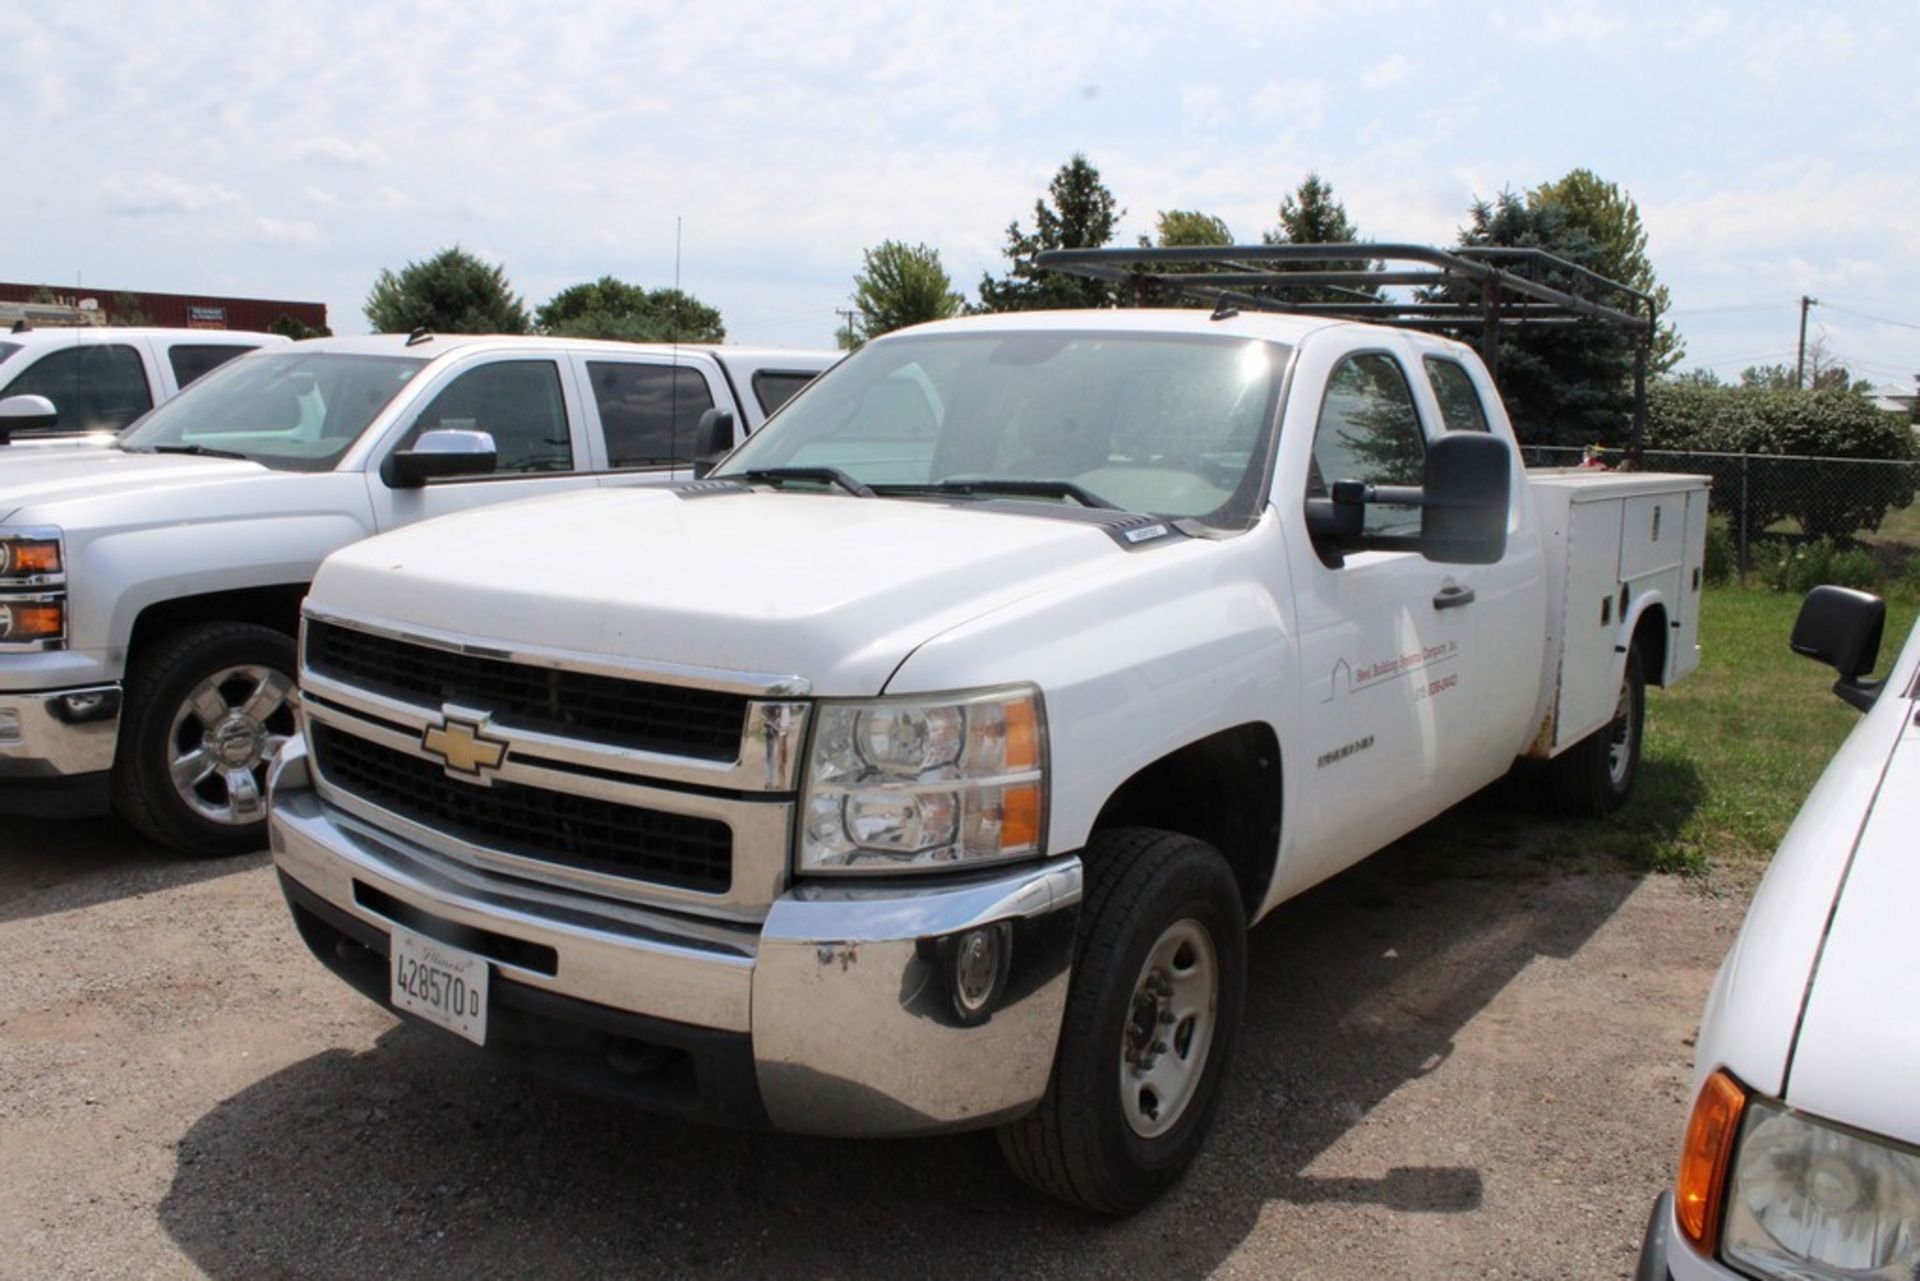 2010 CHEVROLET SILVERADO 2500HD, EXTENDED CAB, 6.0L V8, 2WD, UTILITY BED WITH LADDER RACK, VIN - Image 2 of 5